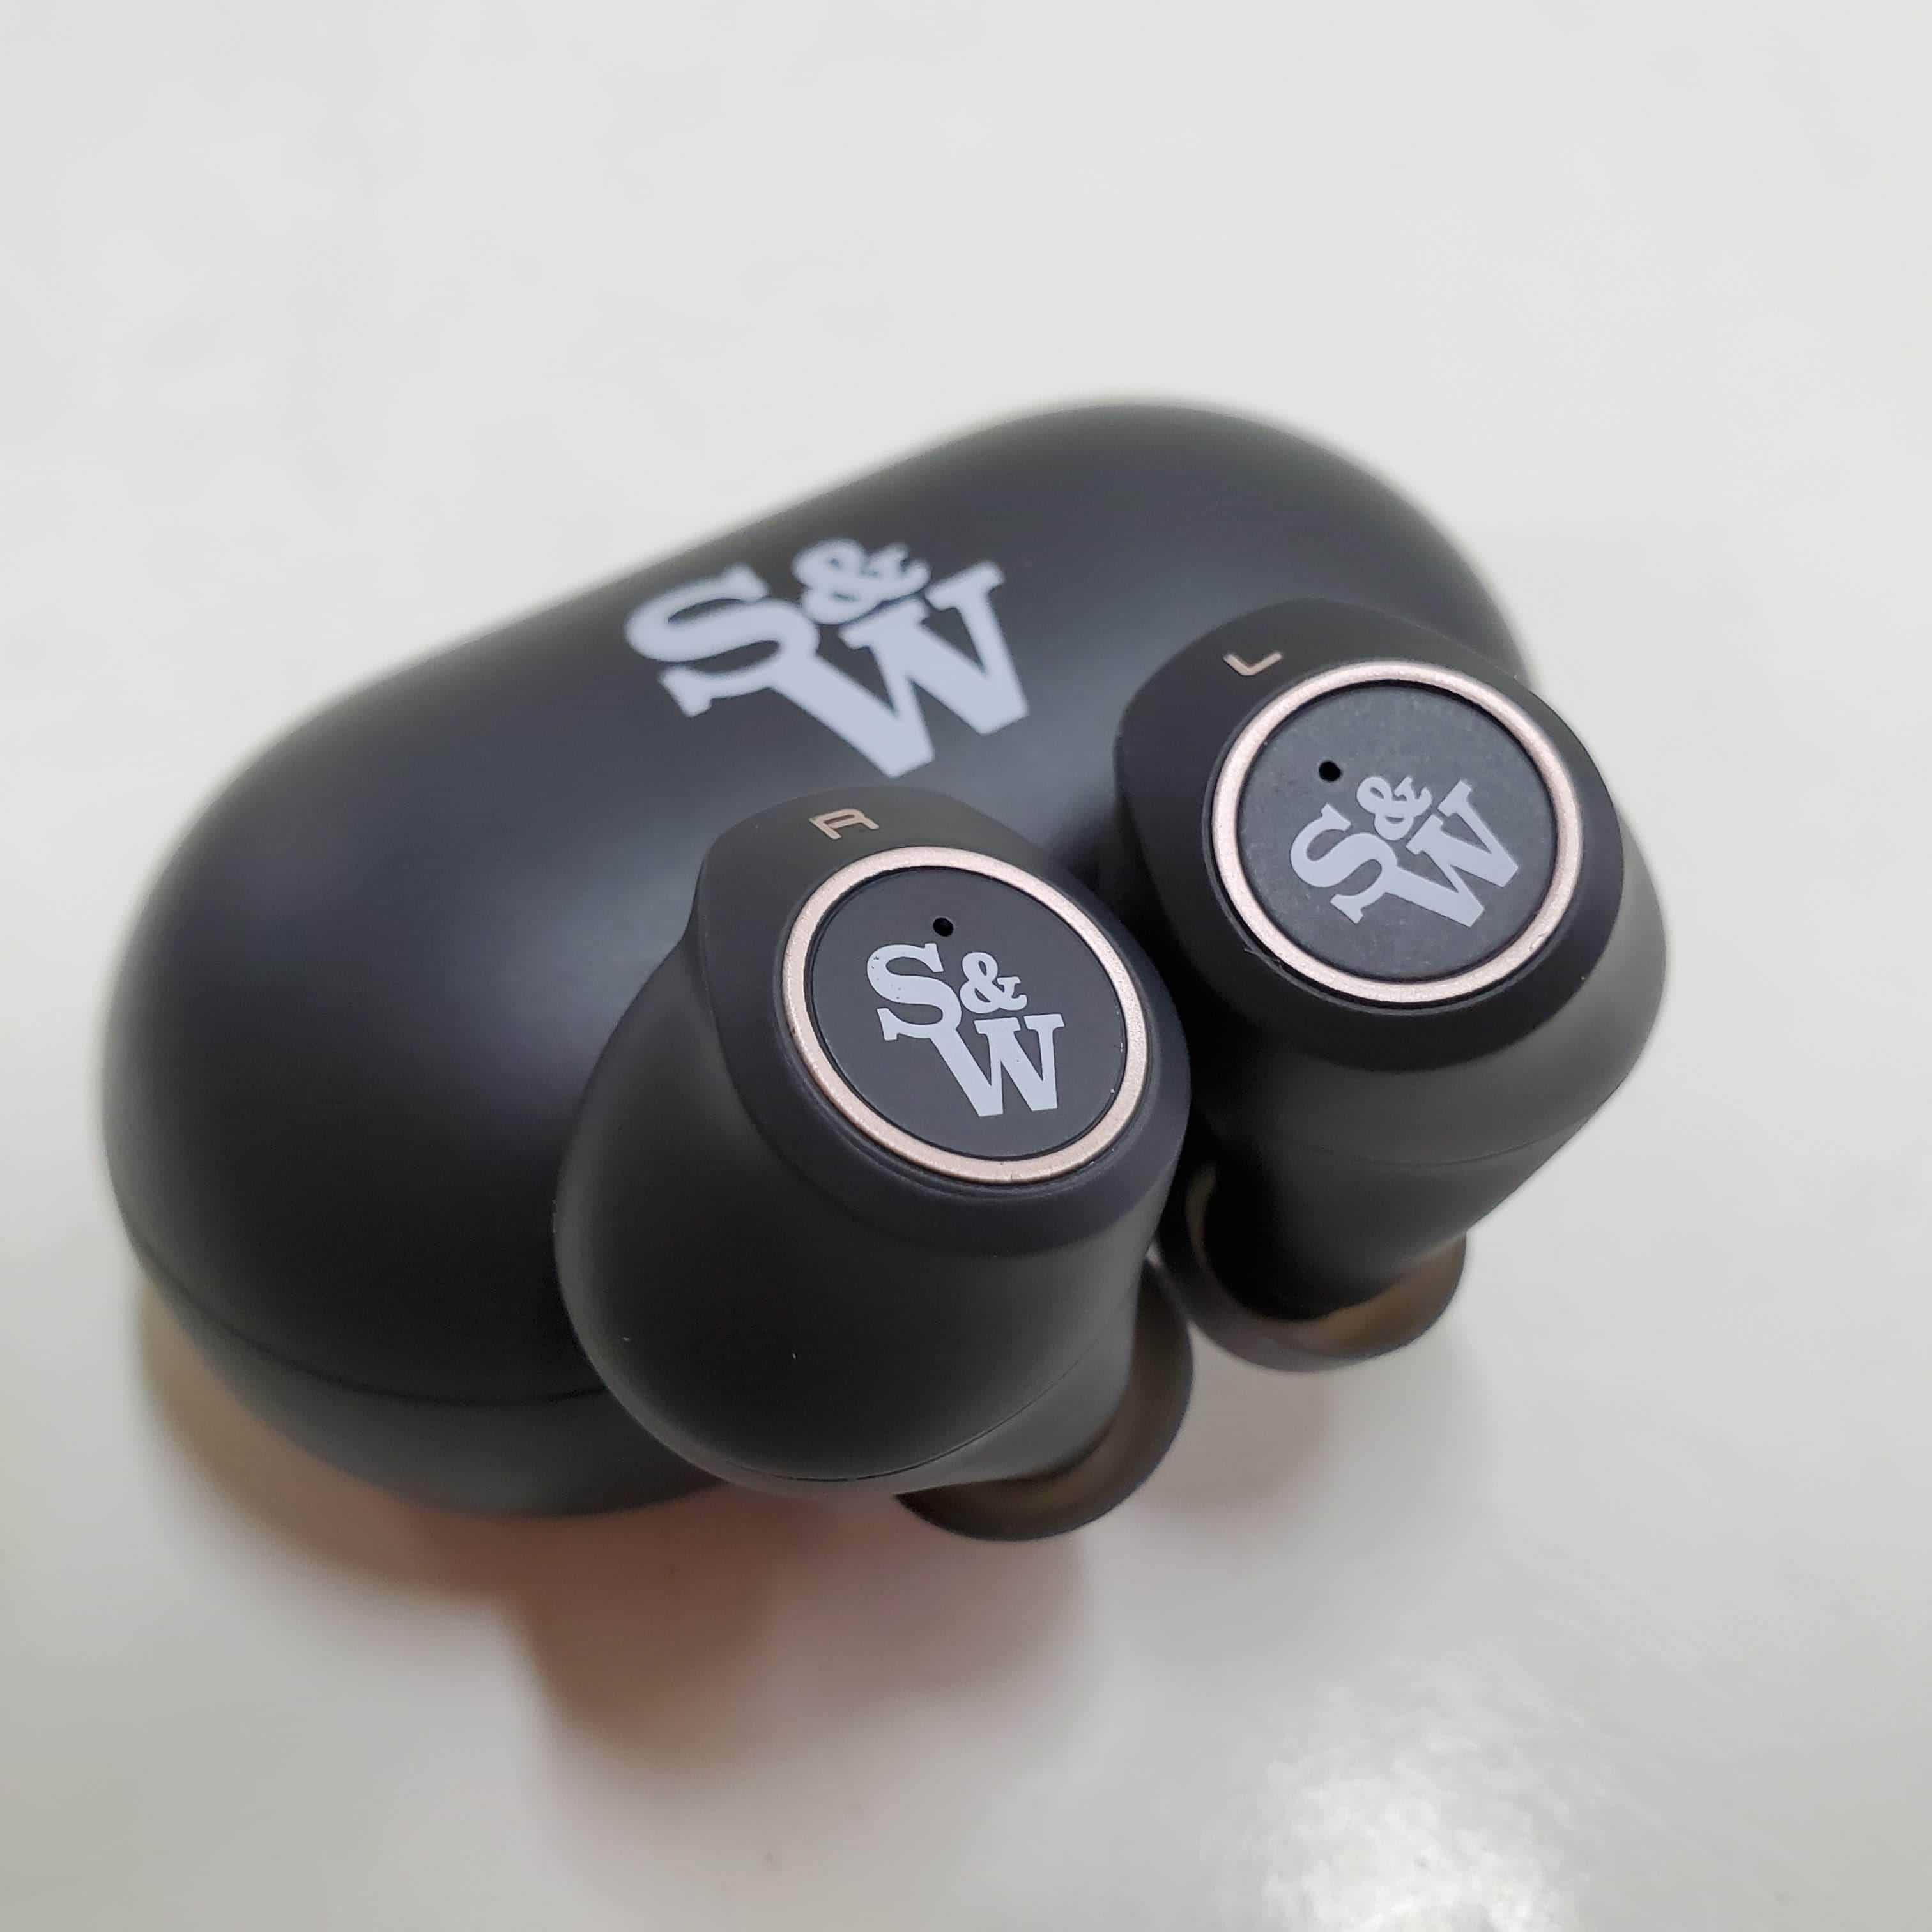 Strauss and Wagner True Wireless Earbuds Review - Best Budget True Wireless for Bass